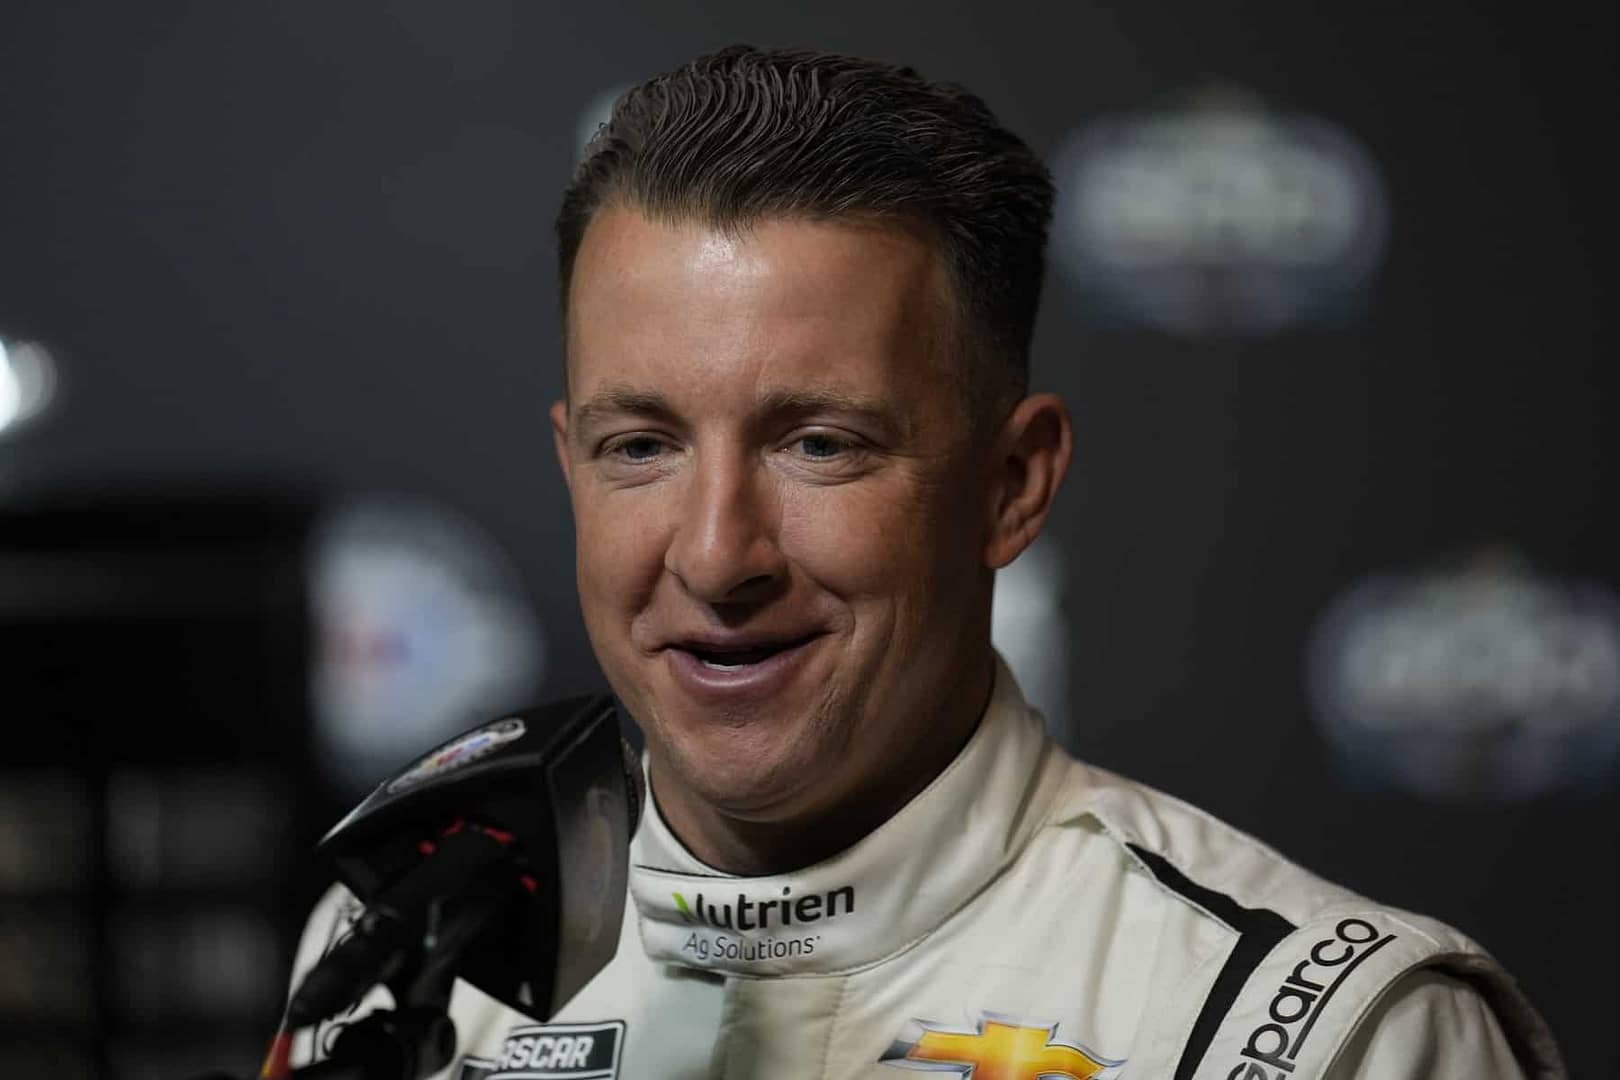 The Verizon 200 at the Brickyard runs on Sunday. Let's look at the betting odds to make some NASCAR predictions and bets for the Indy Road Coruse...